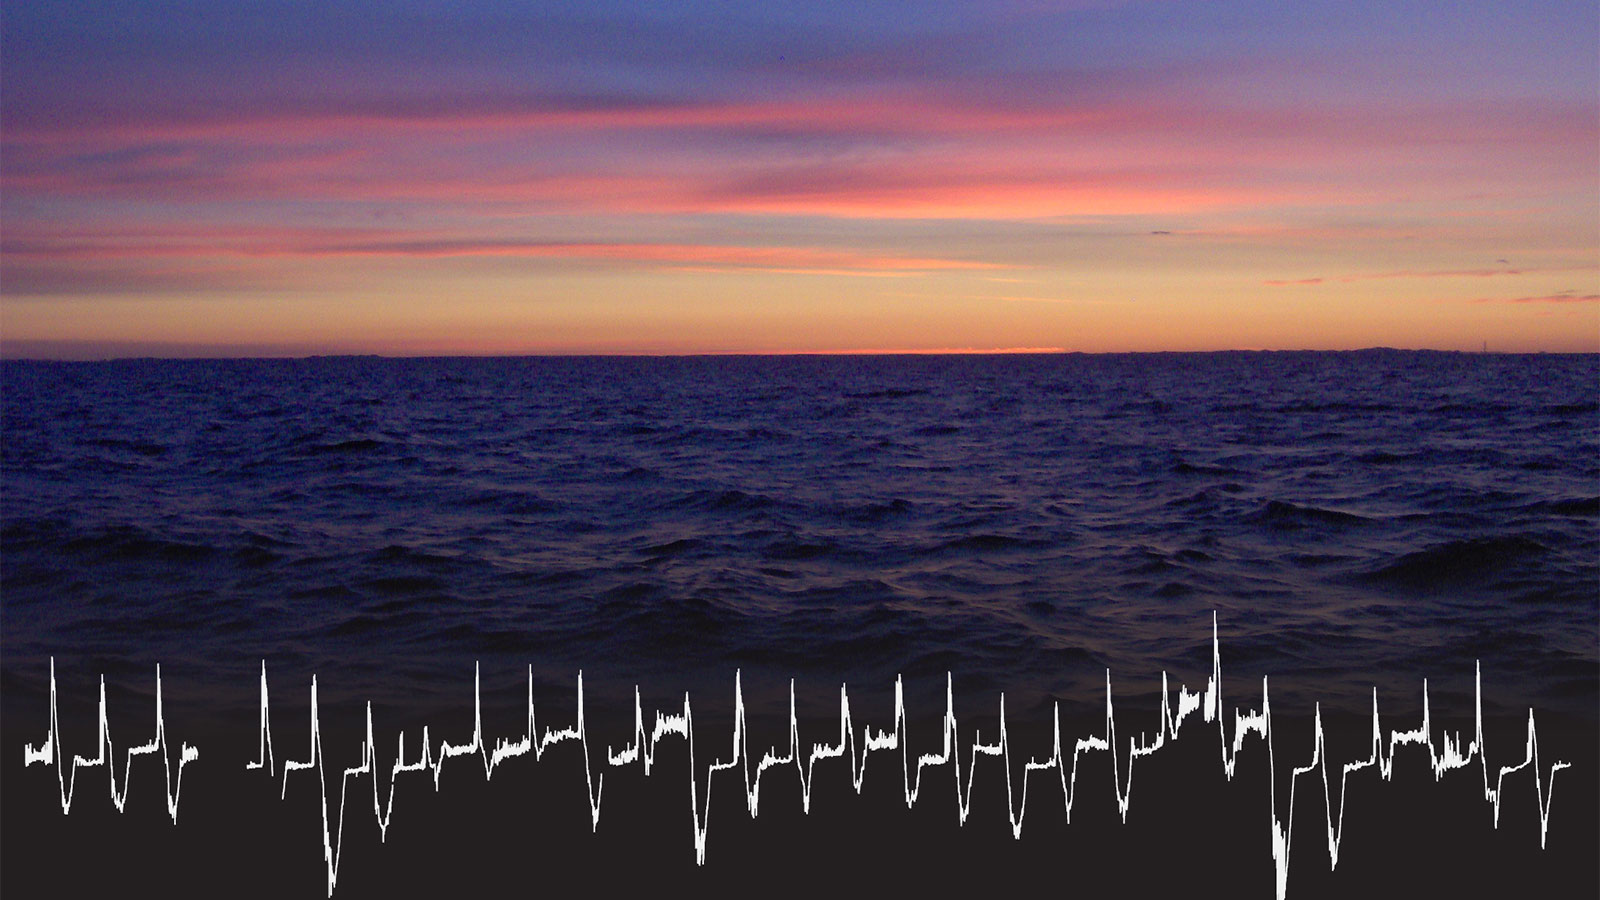 Lake Michigan sunset with graphic over the water